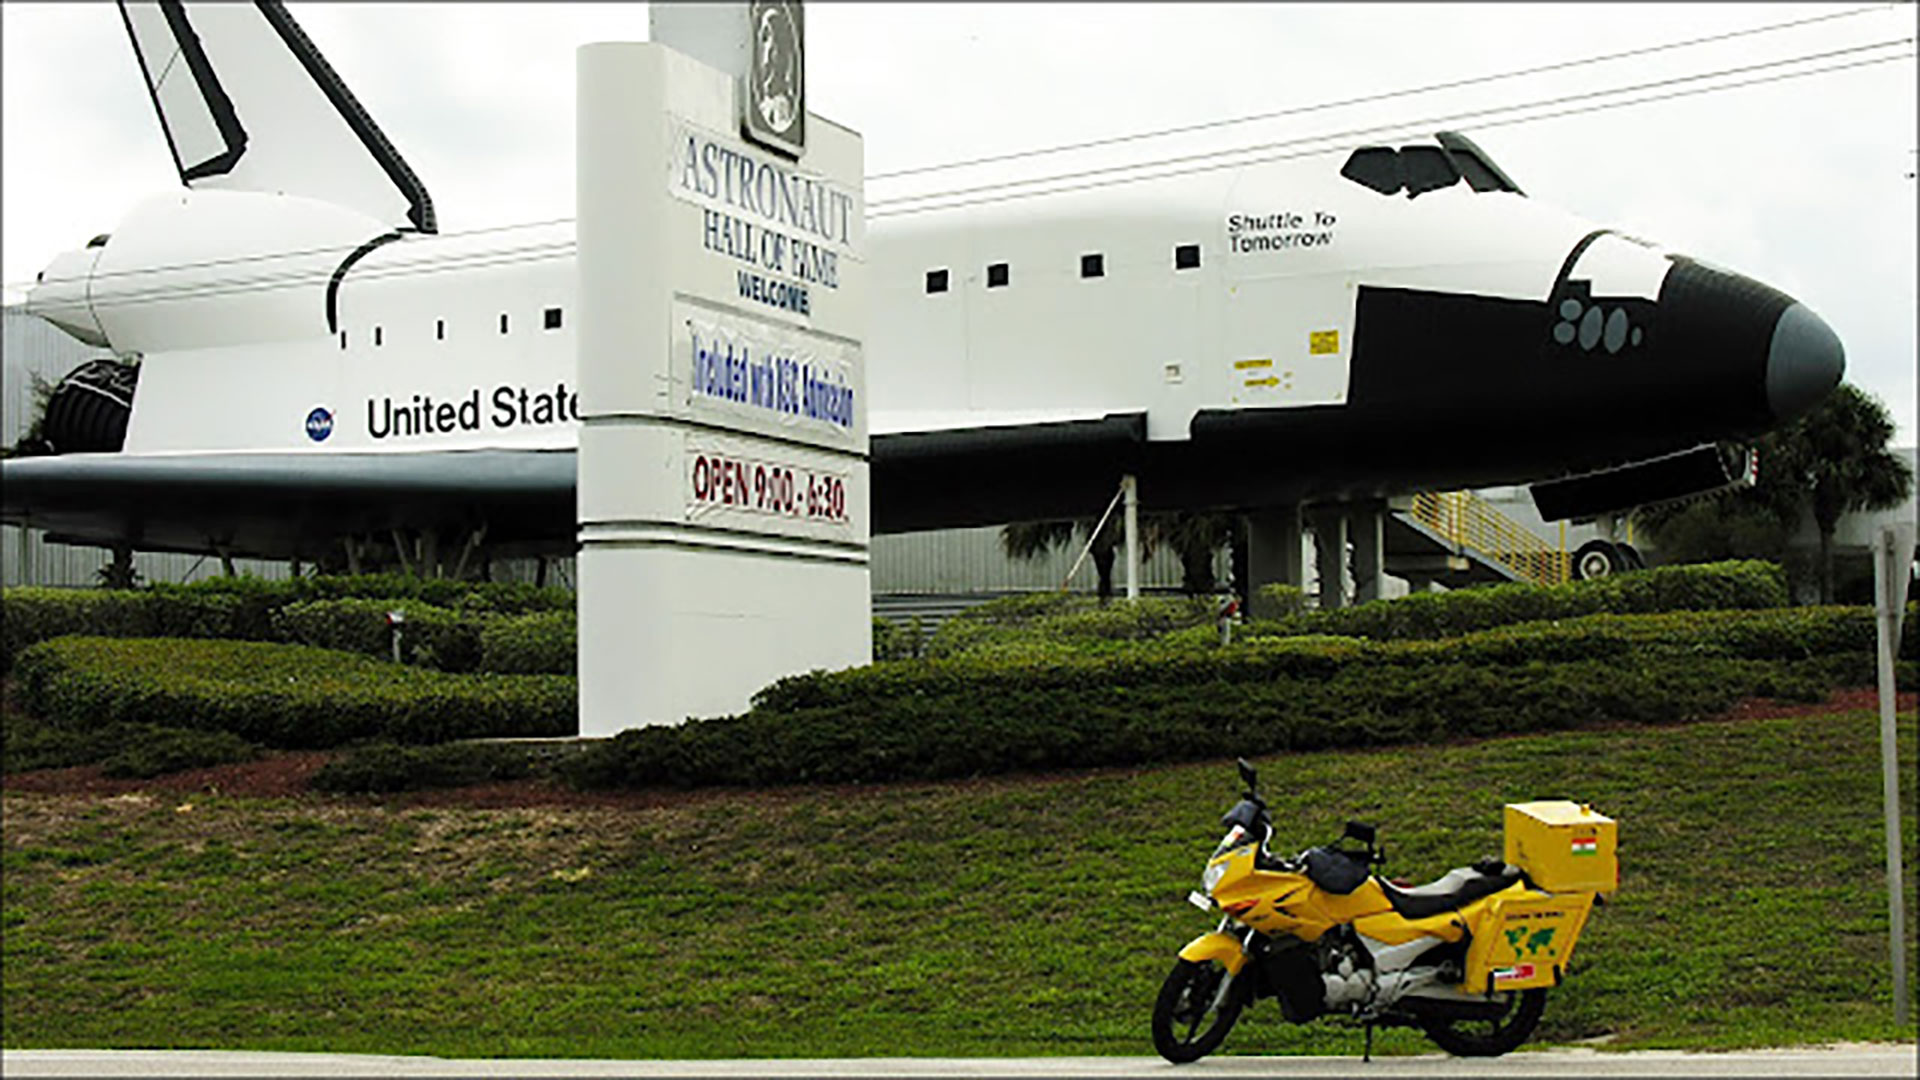 At NASA, My bike with the Discovery space shuttle